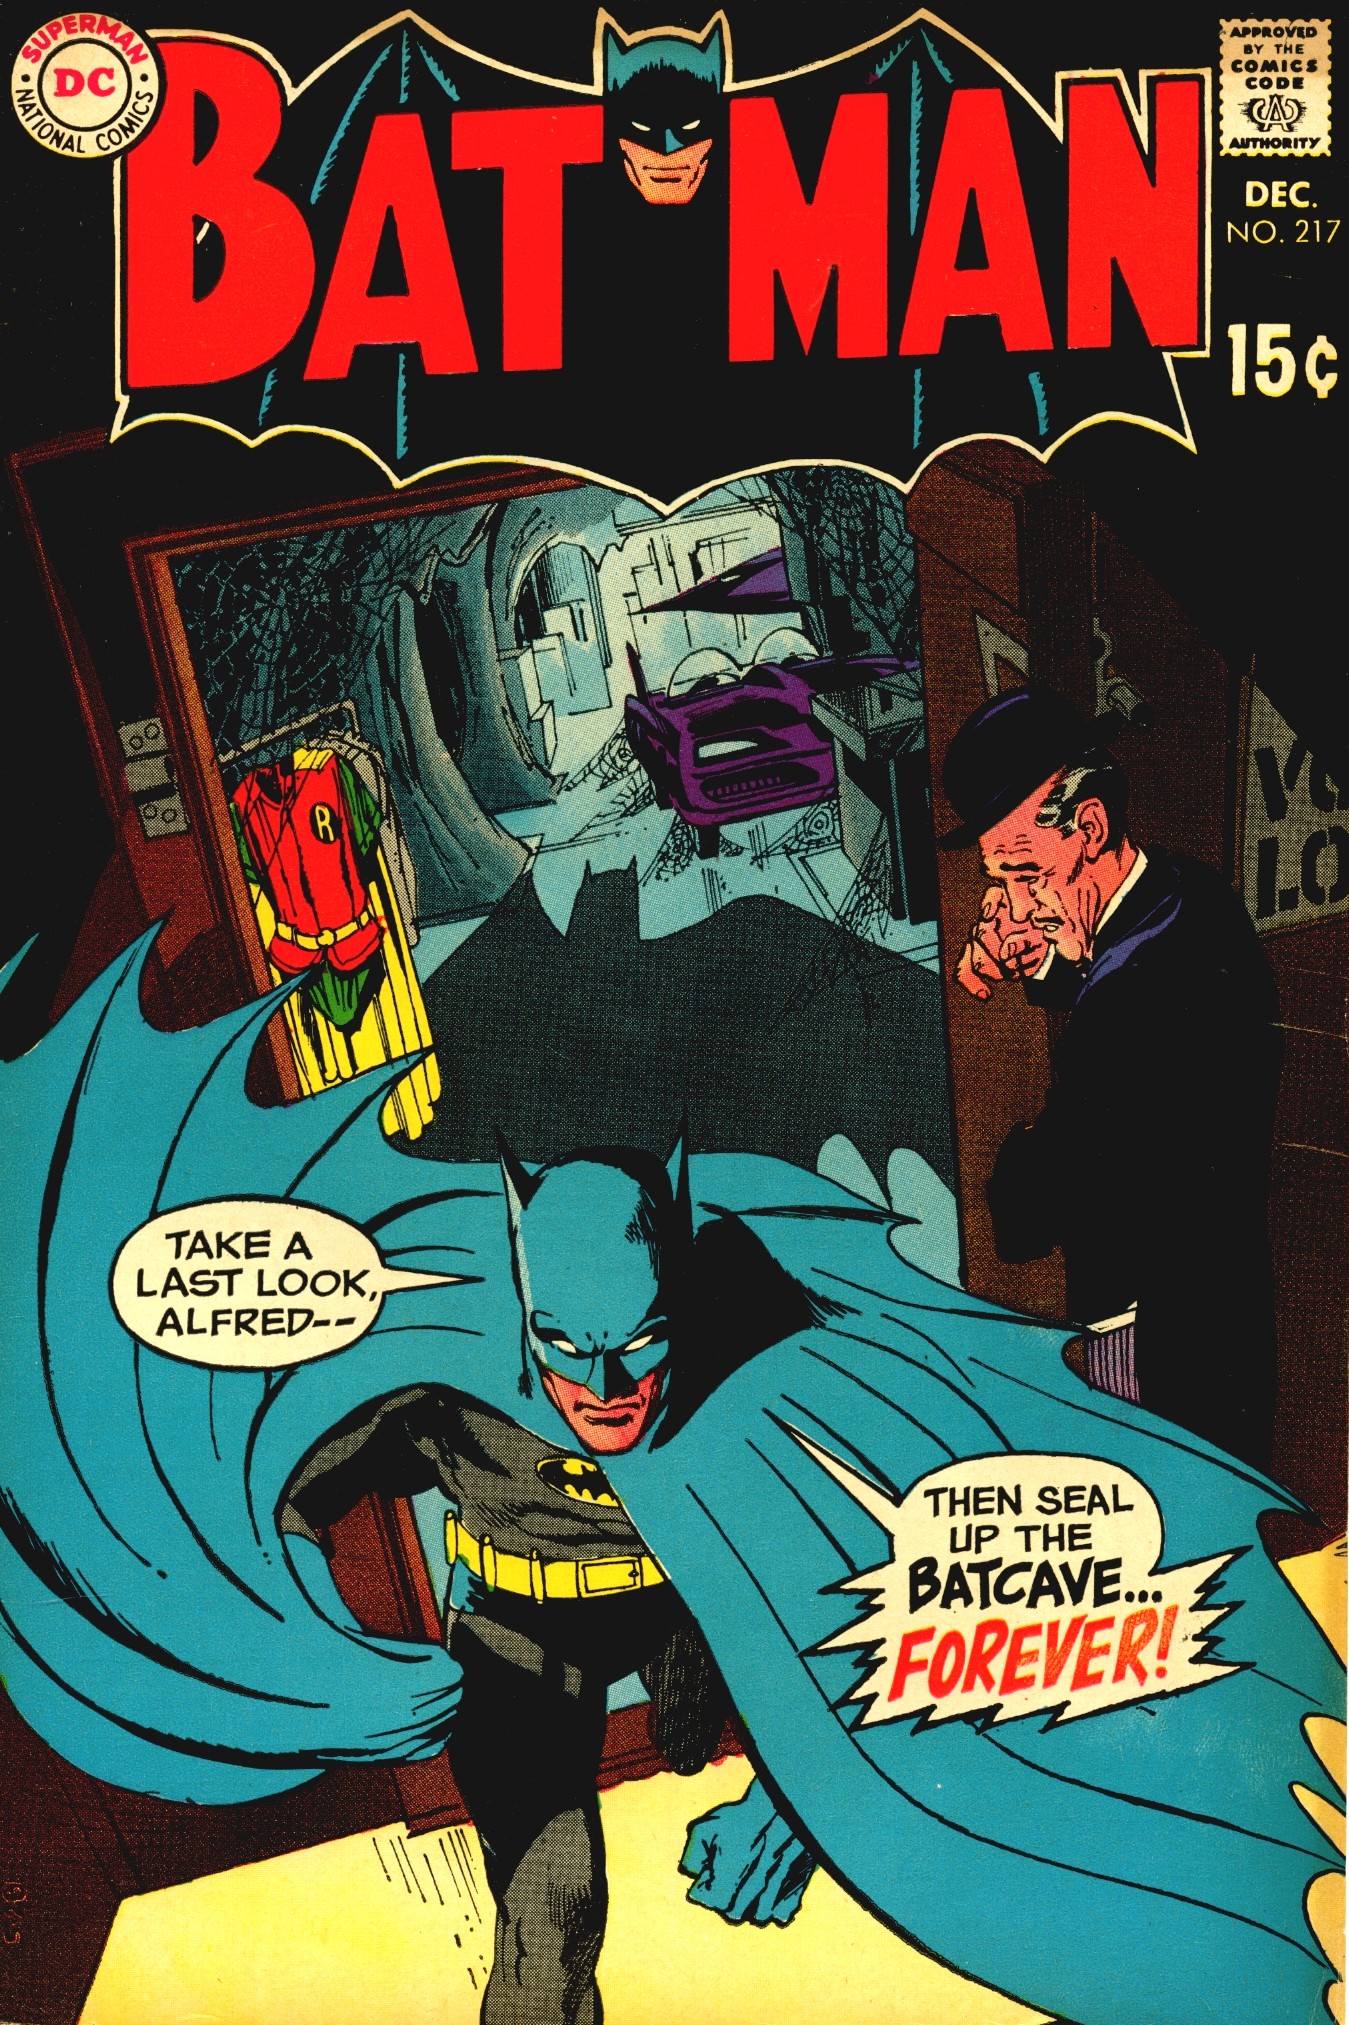 AN OVERVIEW OF DC's COLLECTED EDITIONS OF BATMAN MATERIAL FROM THE BRONZE  AGE (1970-1983)